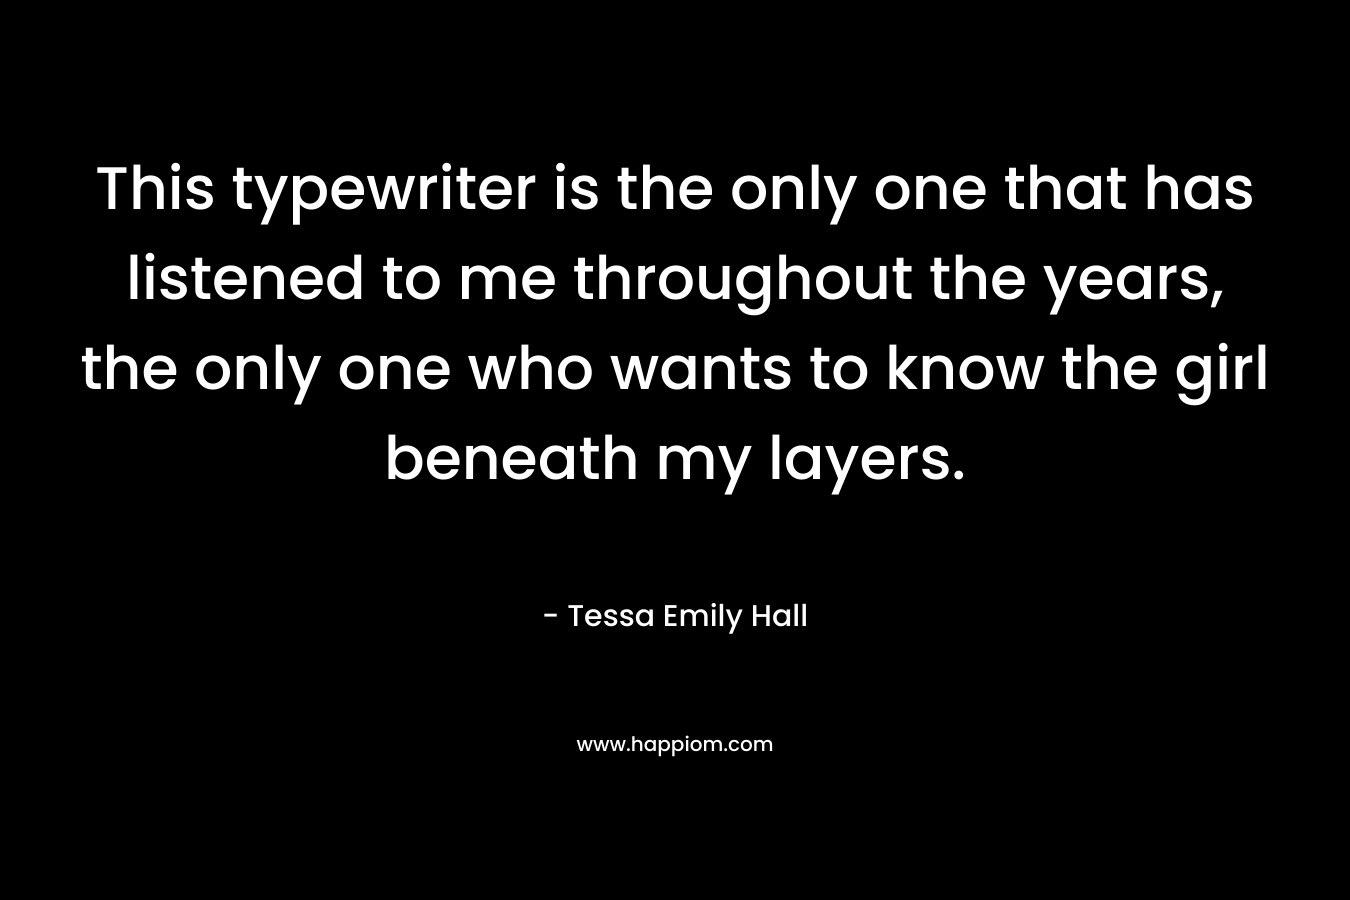 This typewriter is the only one that has listened to me throughout the years, the only one who wants to know the girl beneath my layers.